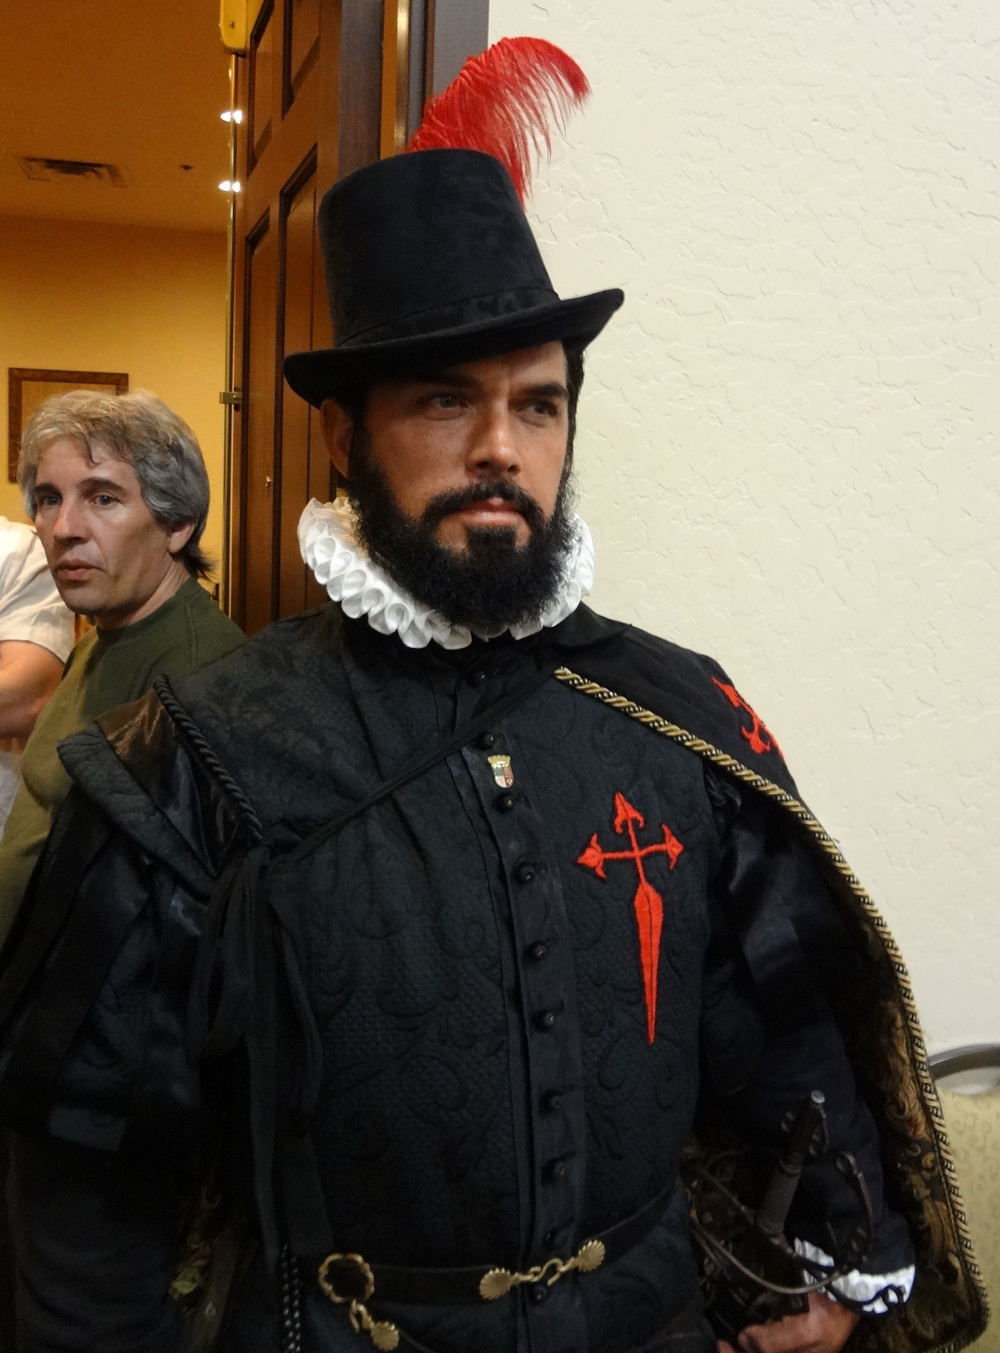 Combat Con's Poster Child: Chad Light as Don Pedro Menedez de Aviles –  Craven Games: In-Depth Tabletop Games and LARPing Coverage